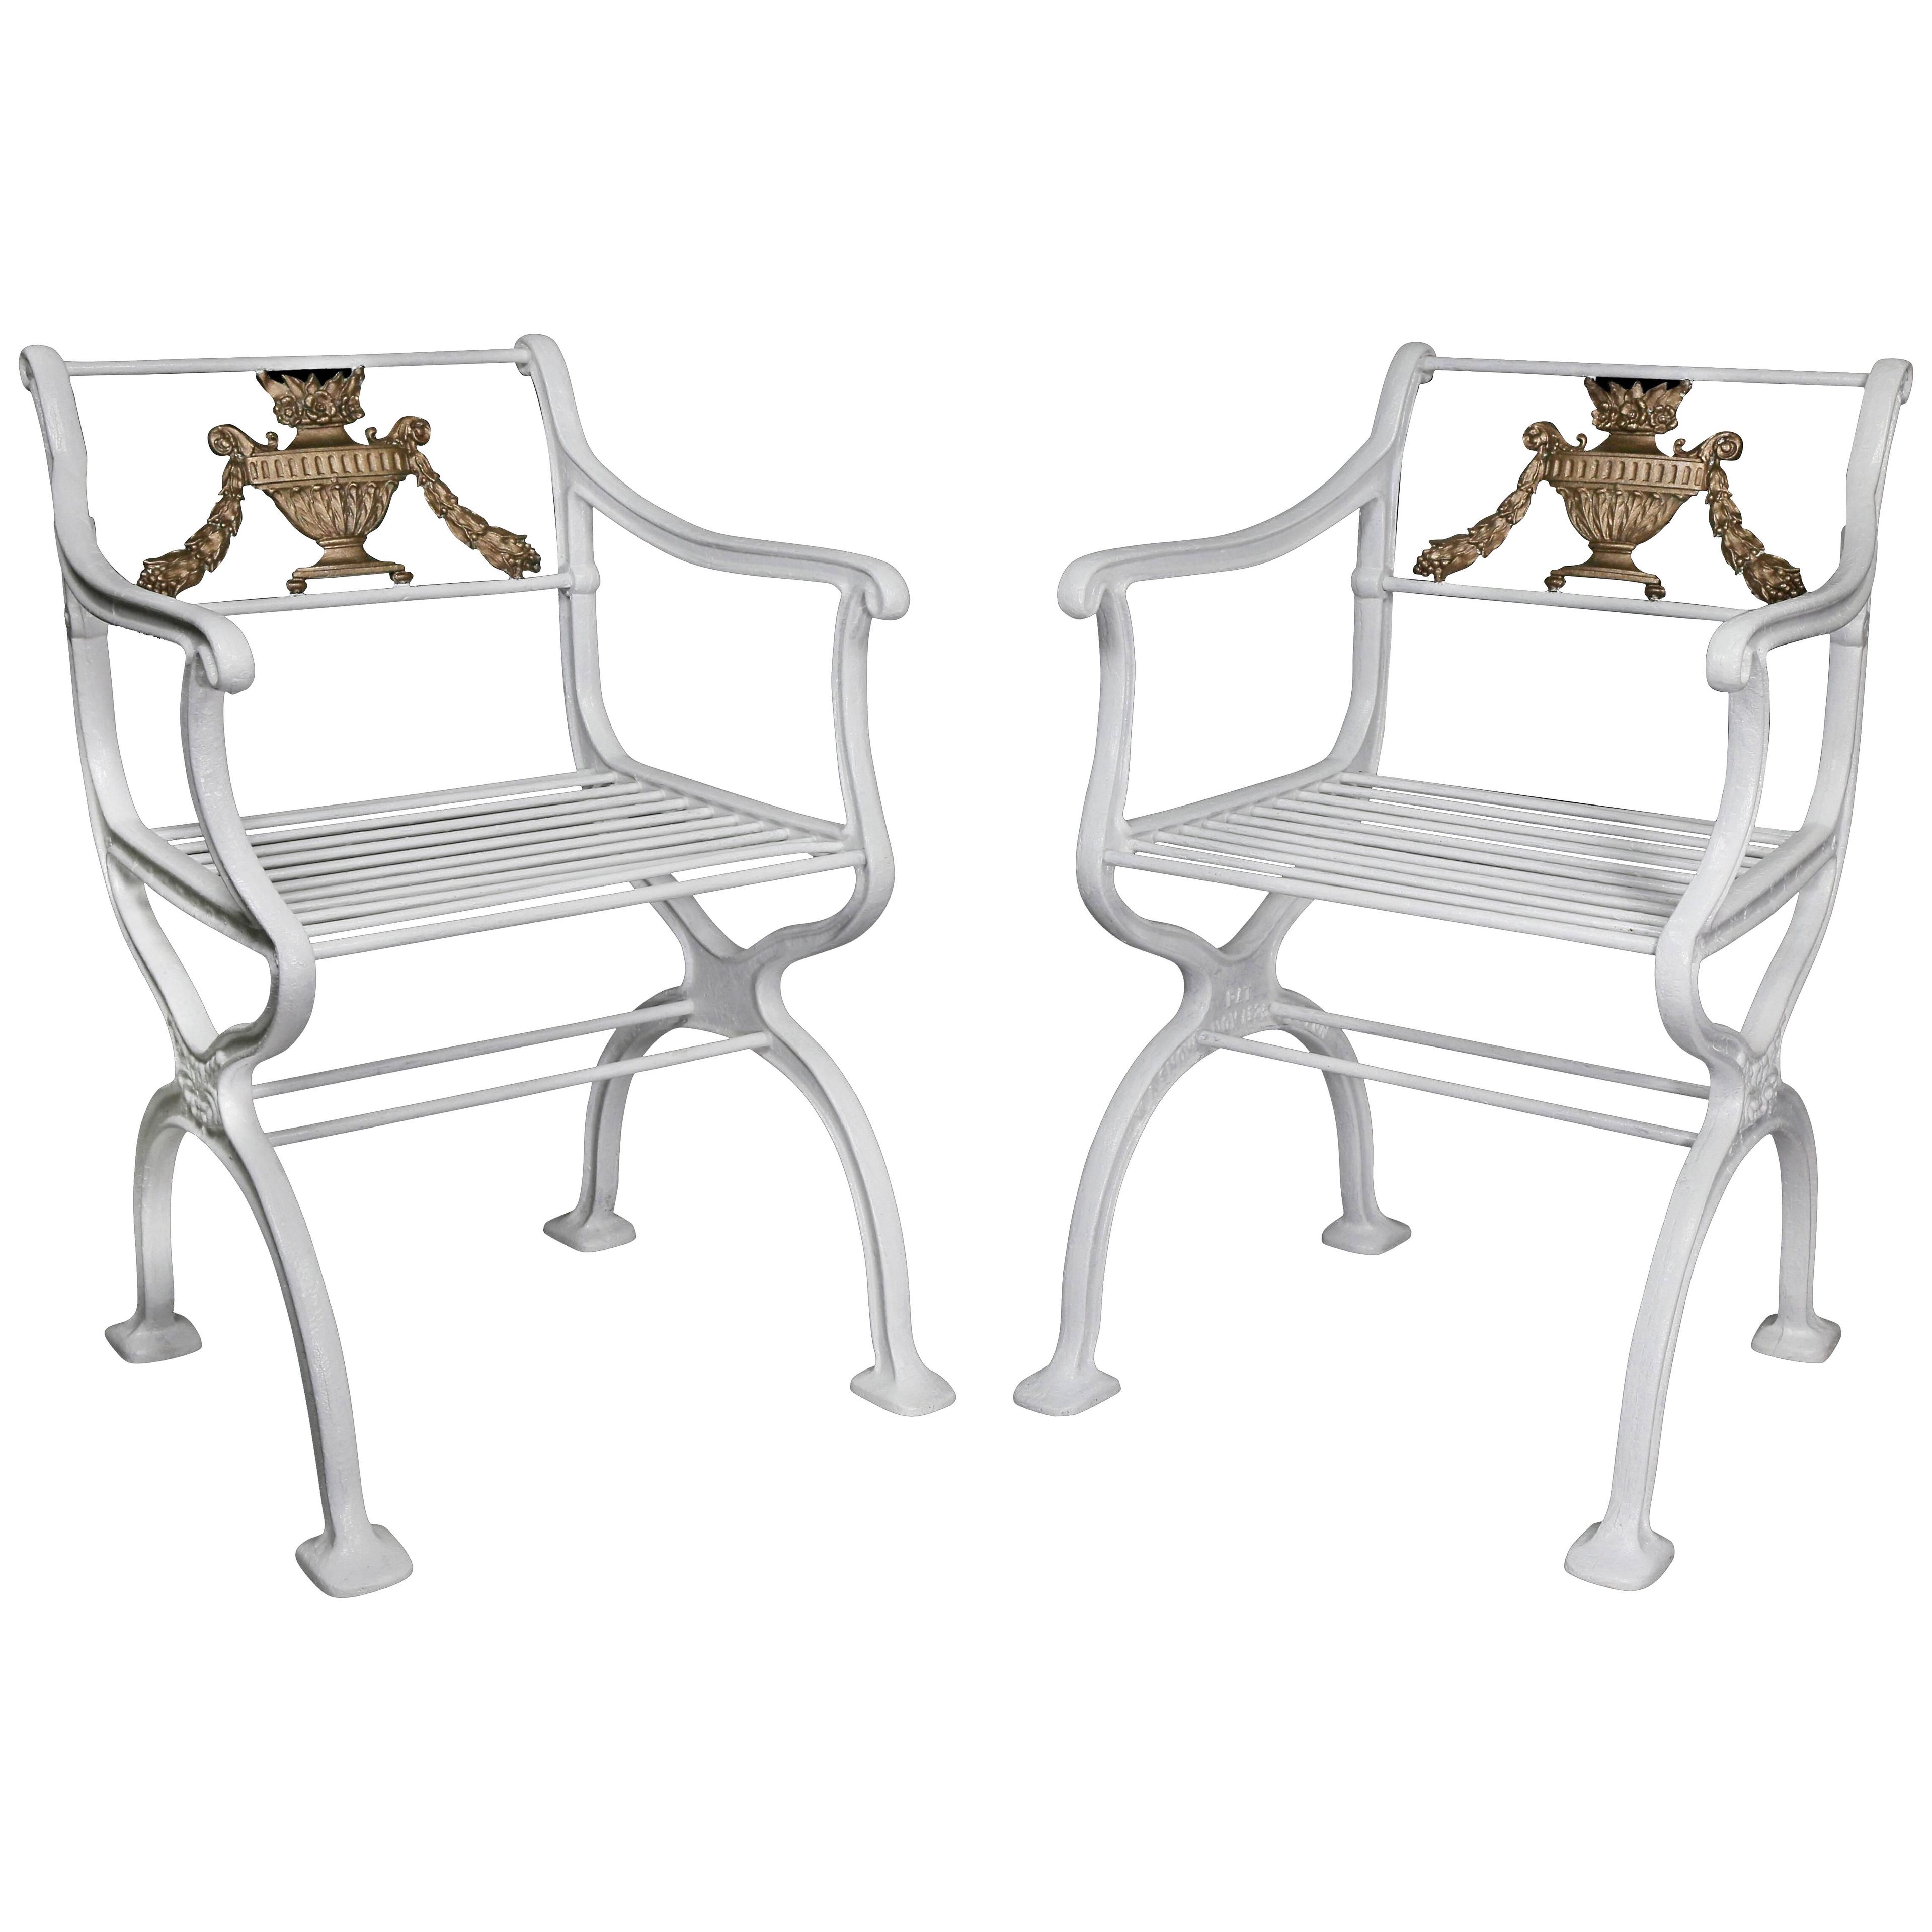 American Cast Iron Garden Chairs by w.a Snow, Boston - a Pair